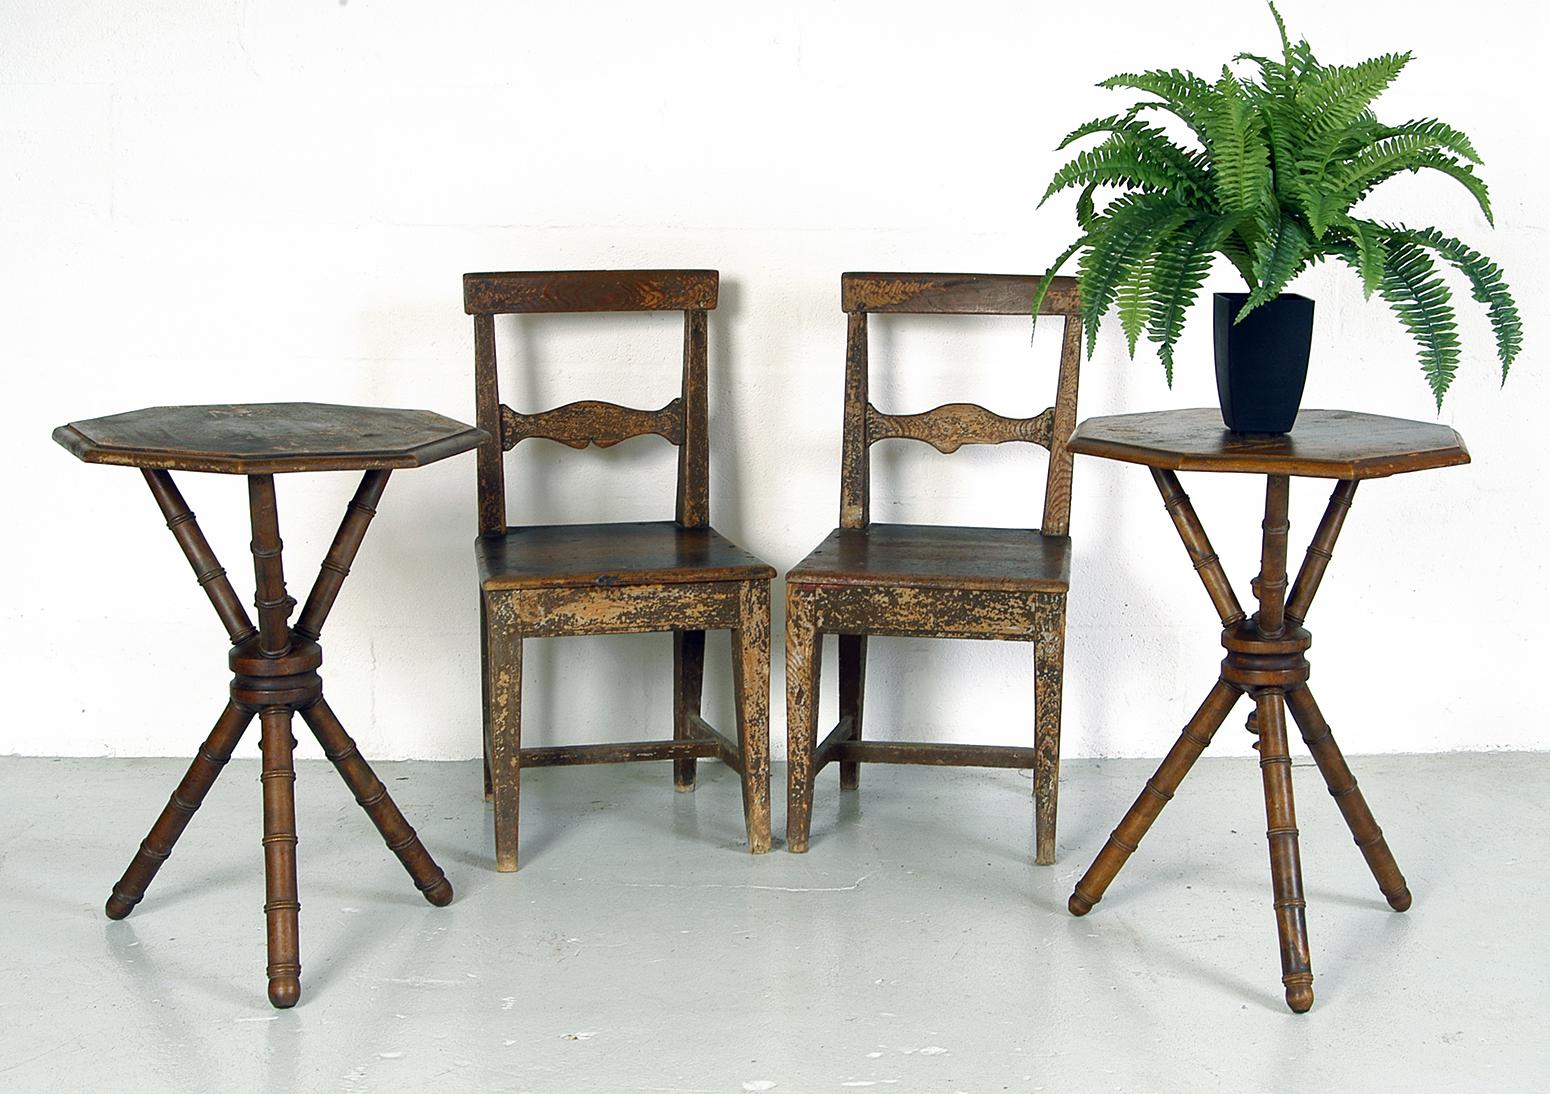 Primitive Pair of 19th Century Pitch Pine Swedish Vernacular Chairs in Original Paint